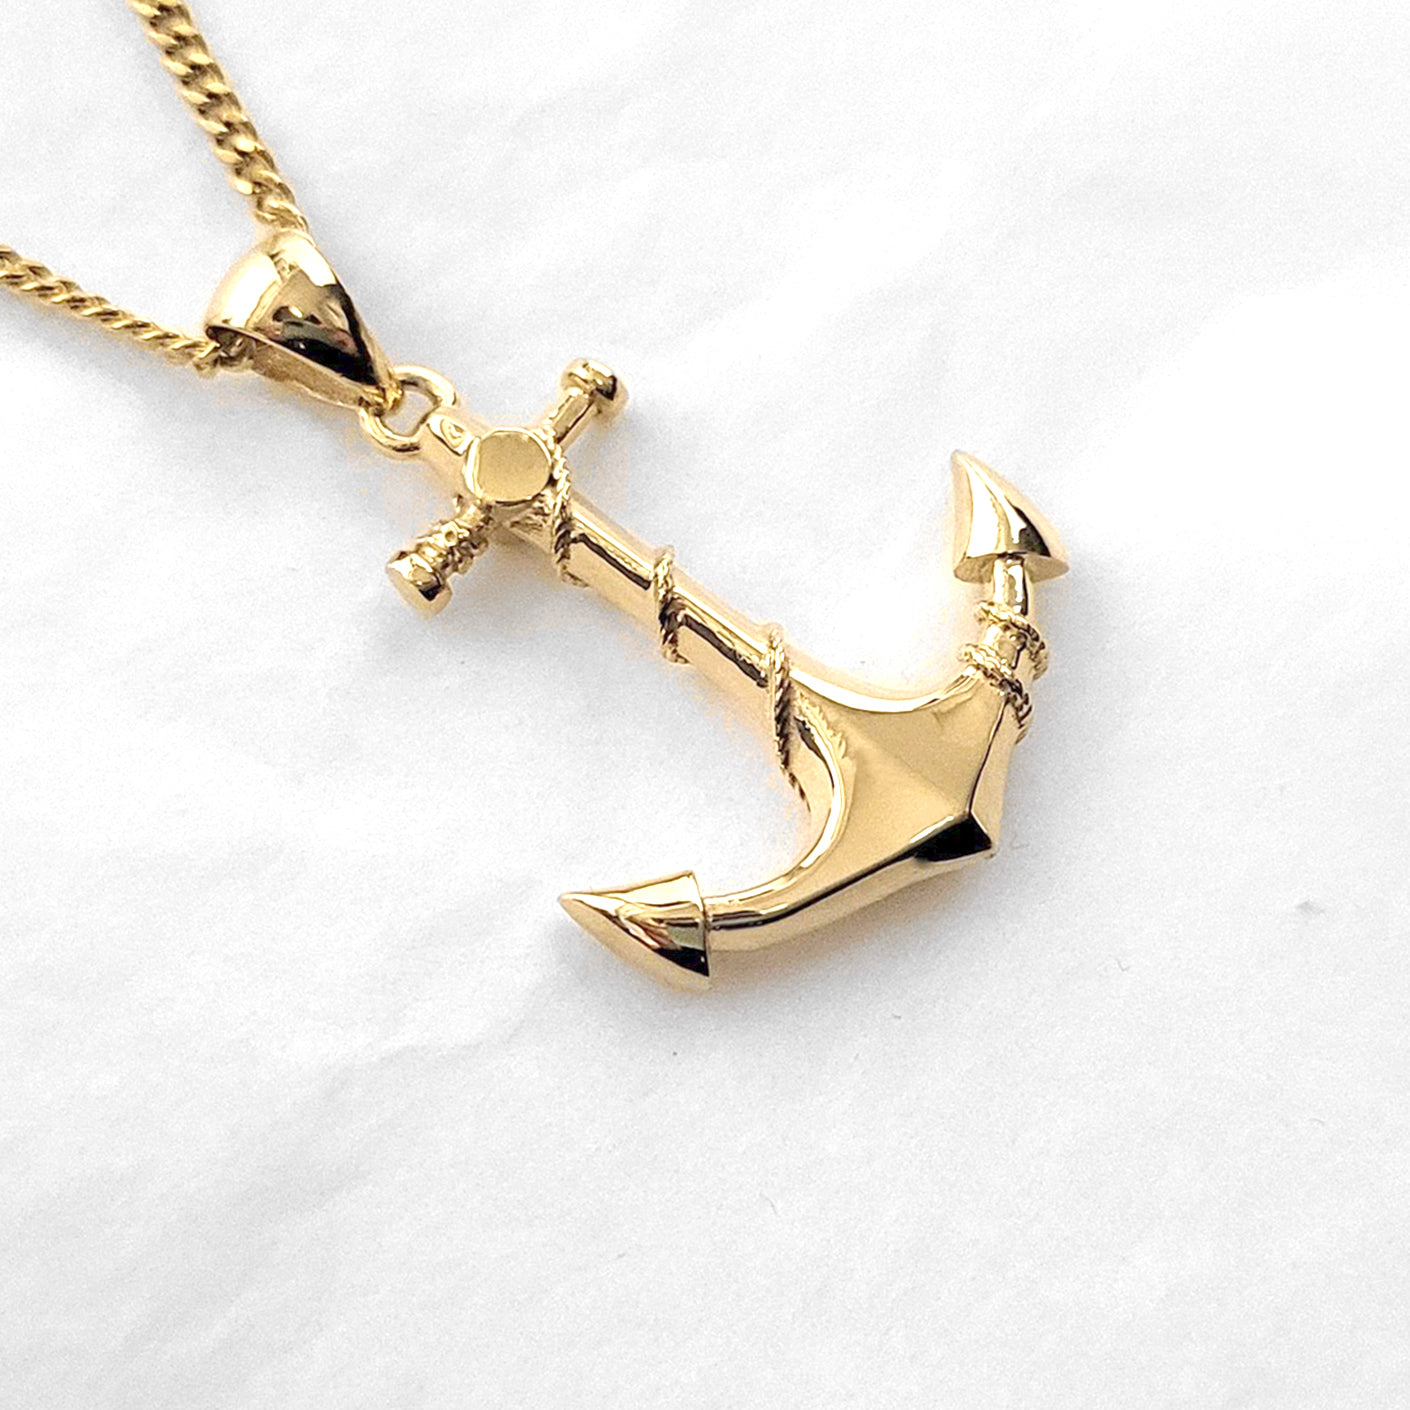 Buy Gold Anchor Necklace/ Tiny Gold Anchor Necklace/ Anchor Necklace Gold/  Ship Anchor Necklace/ 14k Gold Anchor Necklace/ Birthday Gift/ Layer Online  in India - Etsy